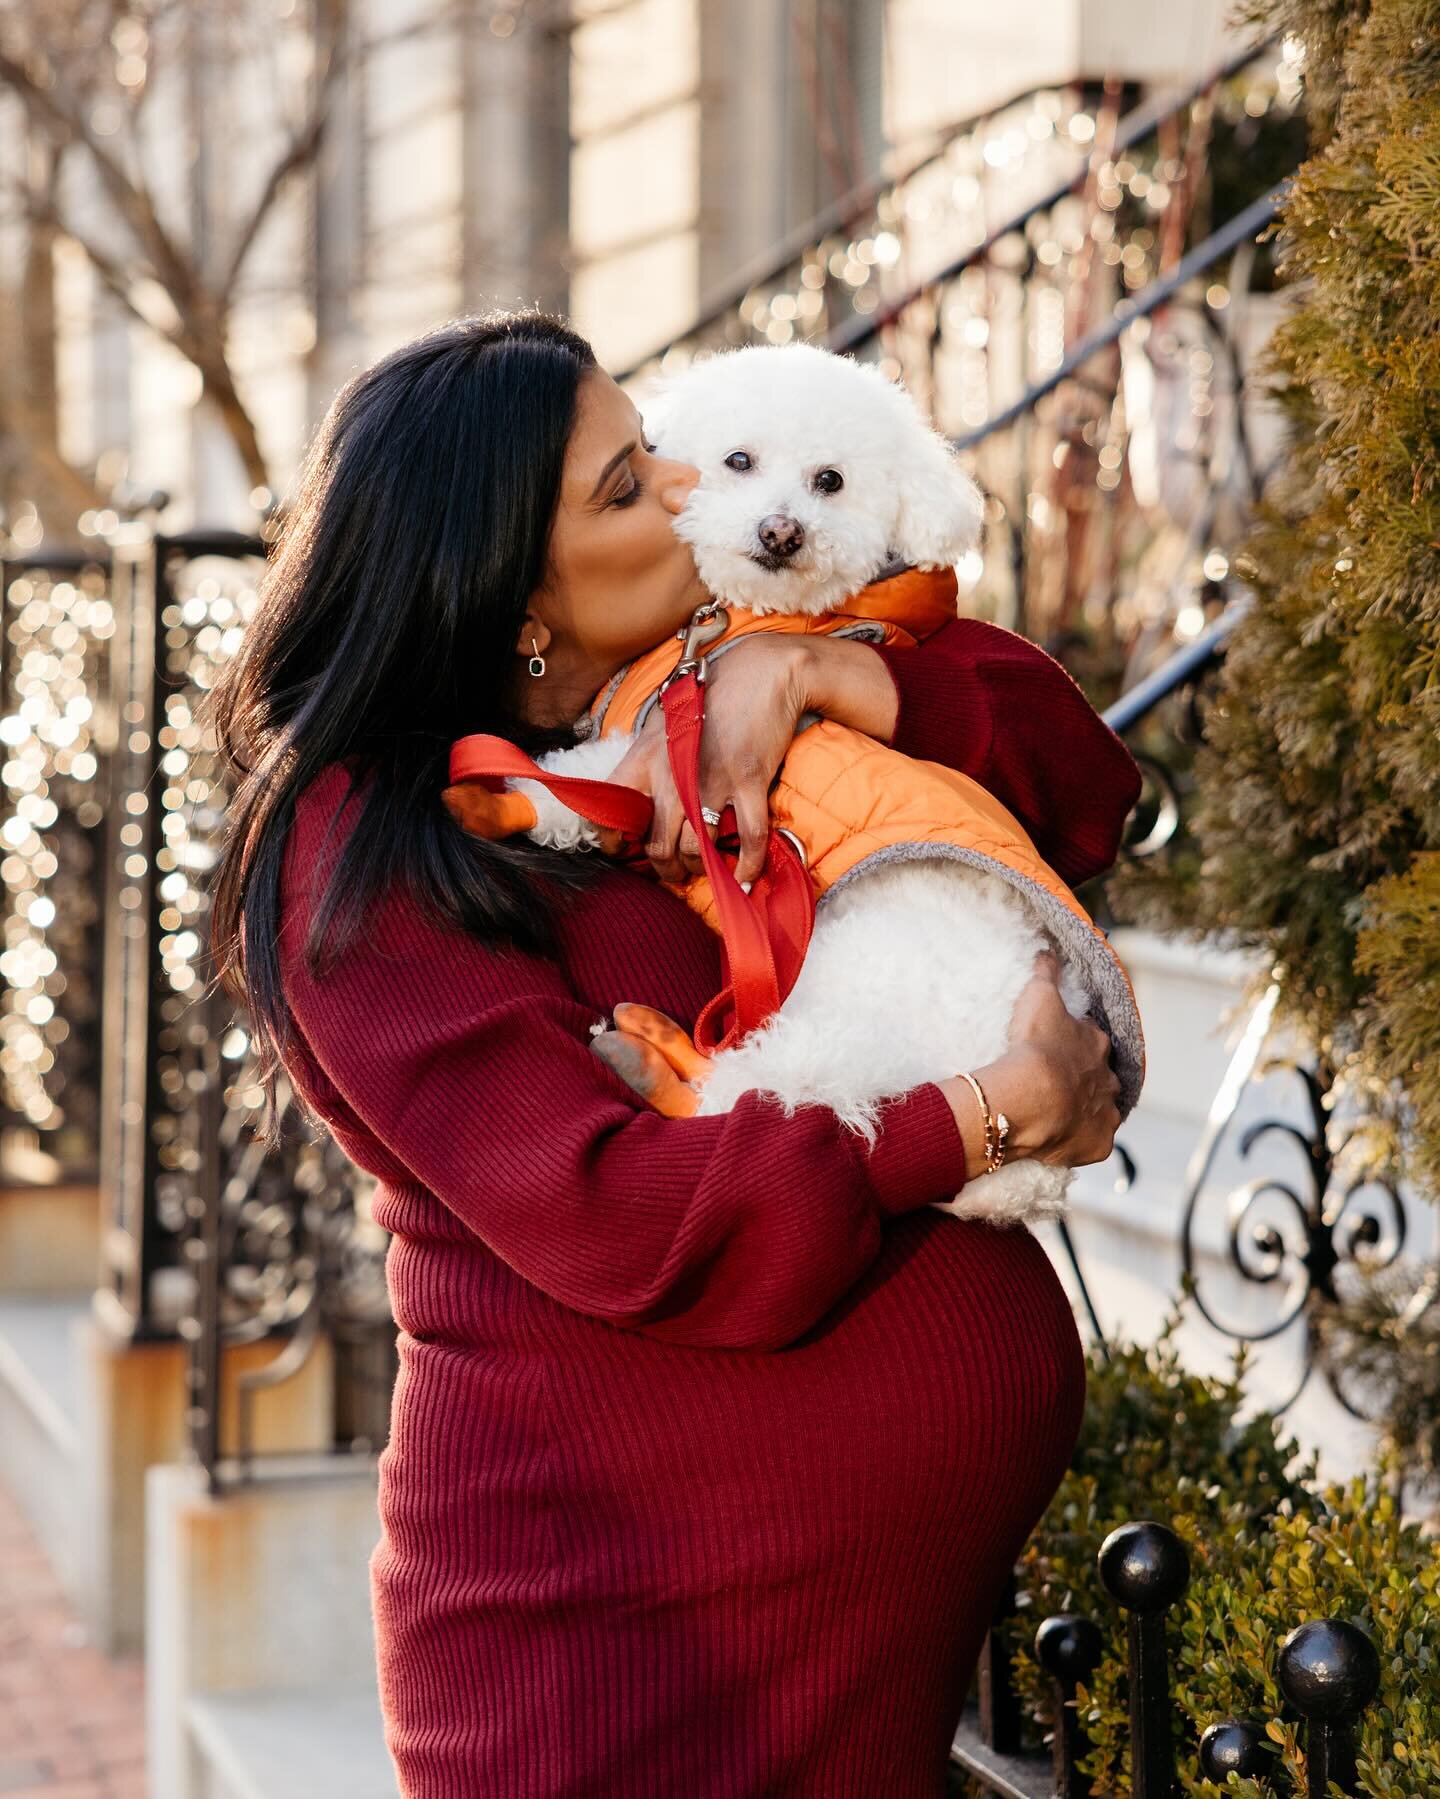 I wanted to share something really special with you all &ndash; my latest winter maternity session in the lovely Beacon Hill area of Boston!  I feel really grateful for getting to capture such wonderful memories. Each session reminds me of how beauti